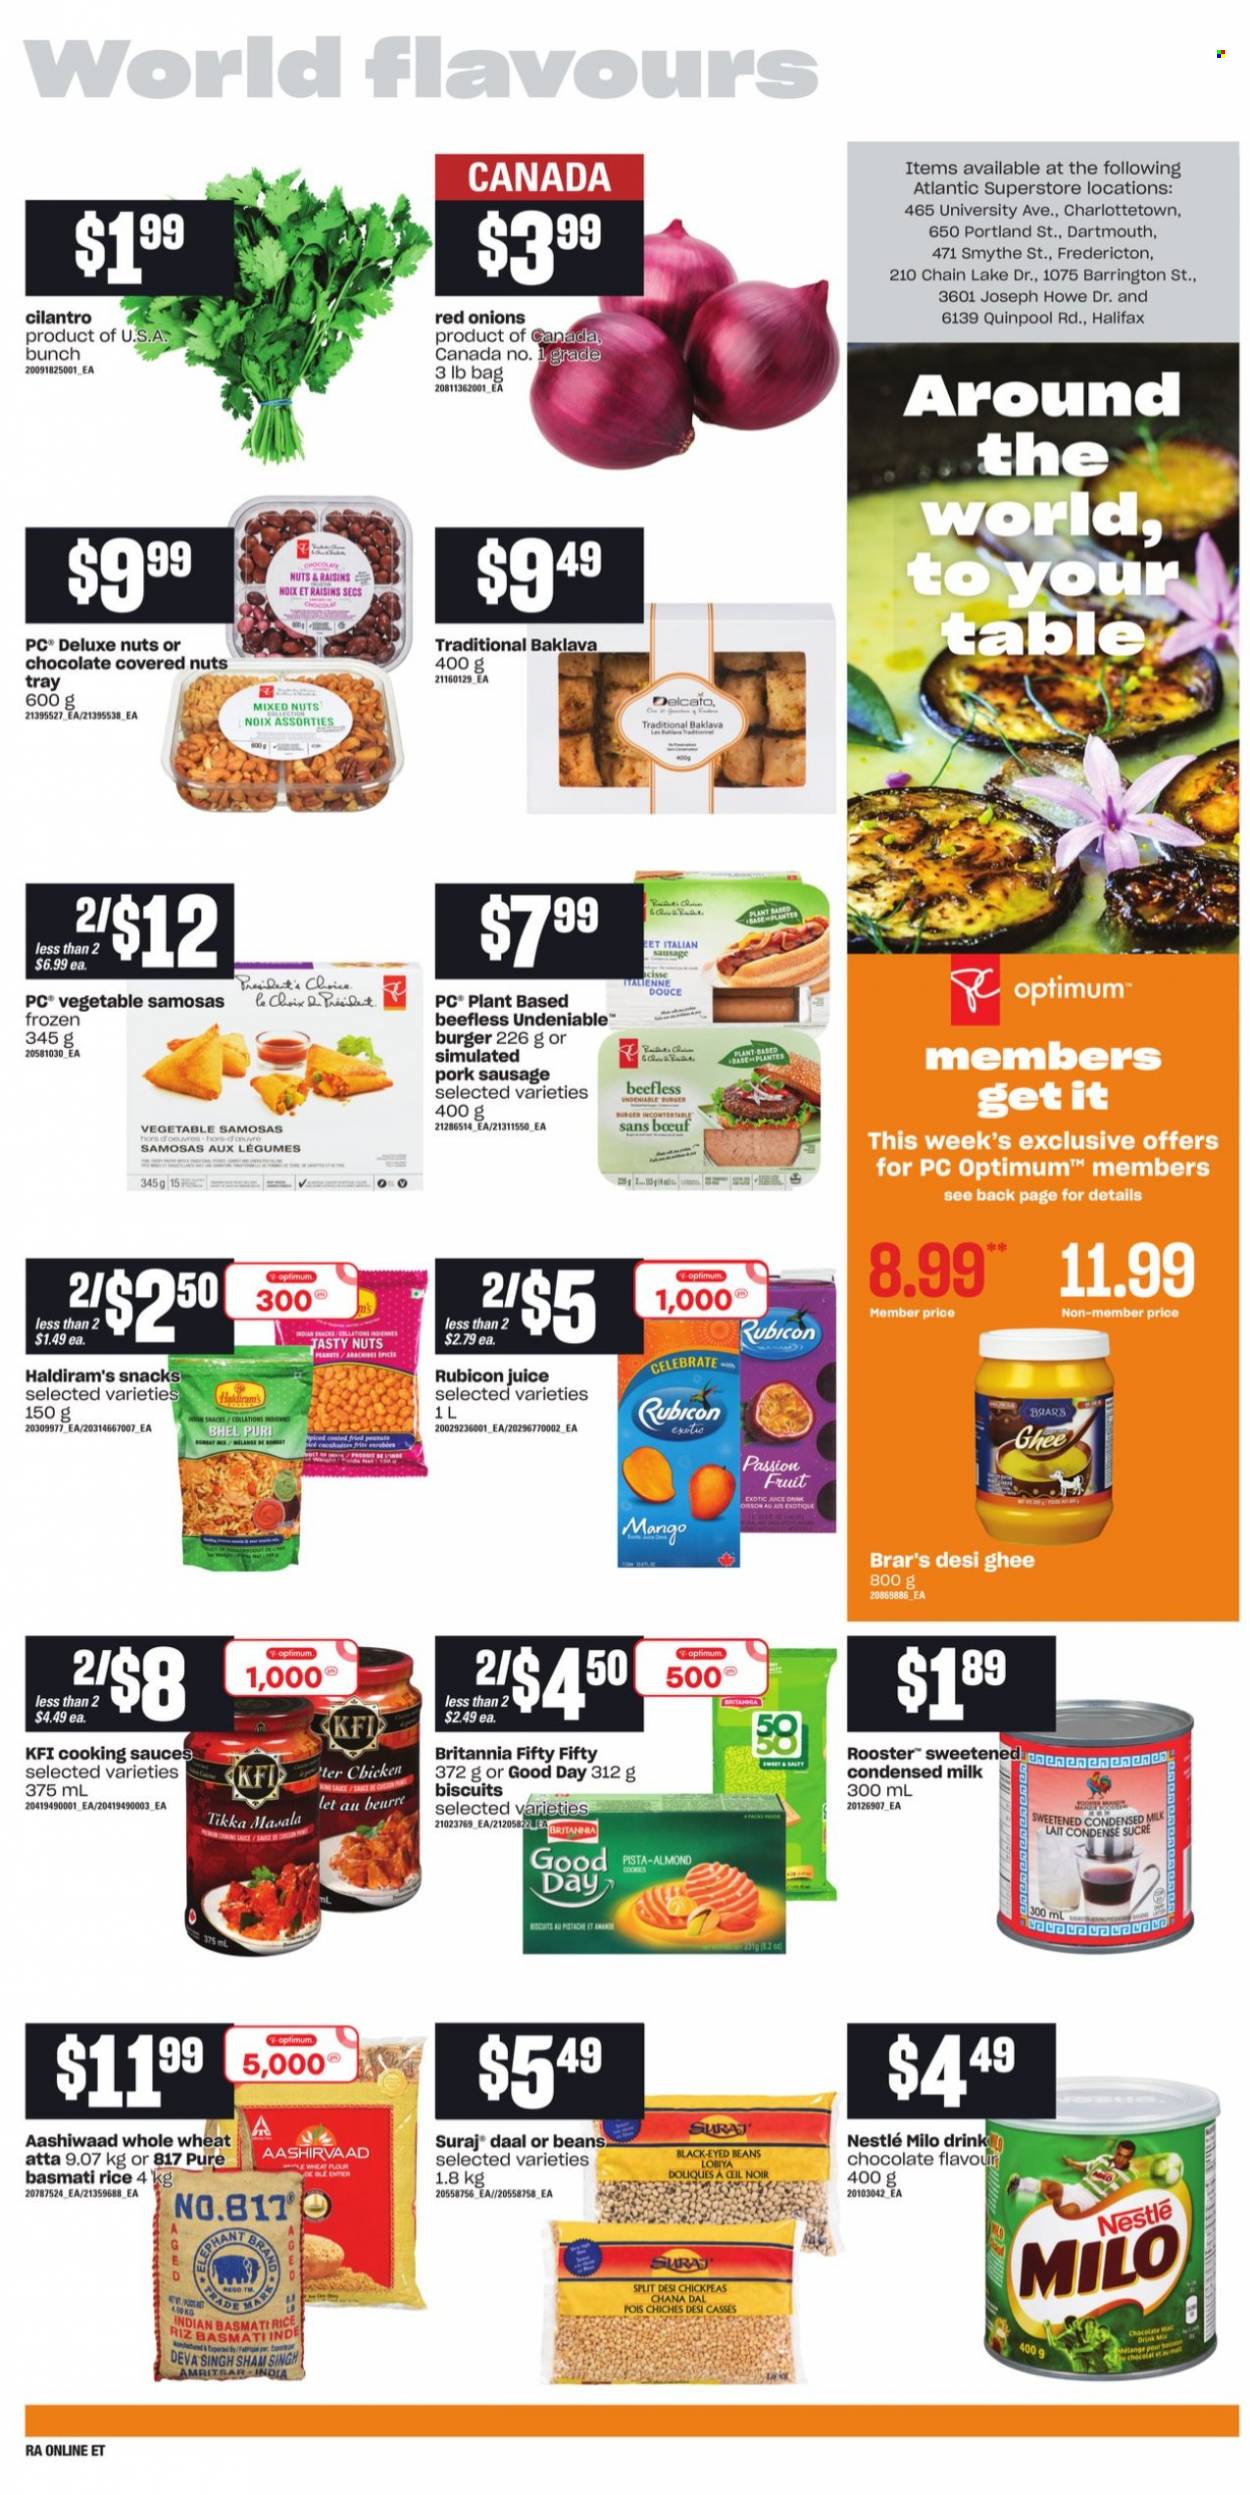 thumbnail - Atlantic Superstore Flyer - October 14, 2021 - October 20, 2021 - Sales products - Ace, beans, red onions, onion, hamburger, Tikka Masala, sausage, pork sausage, italian sausage, milk, condensed milk, Milo, ghee, snack, biscuit, flour, Aashirvaad, basmati rice, rice, chickpeas, chana dal, cilantro, peanuts, dried fruit, mixed nuts, juice, Optimum, Nestlé. Page 10.